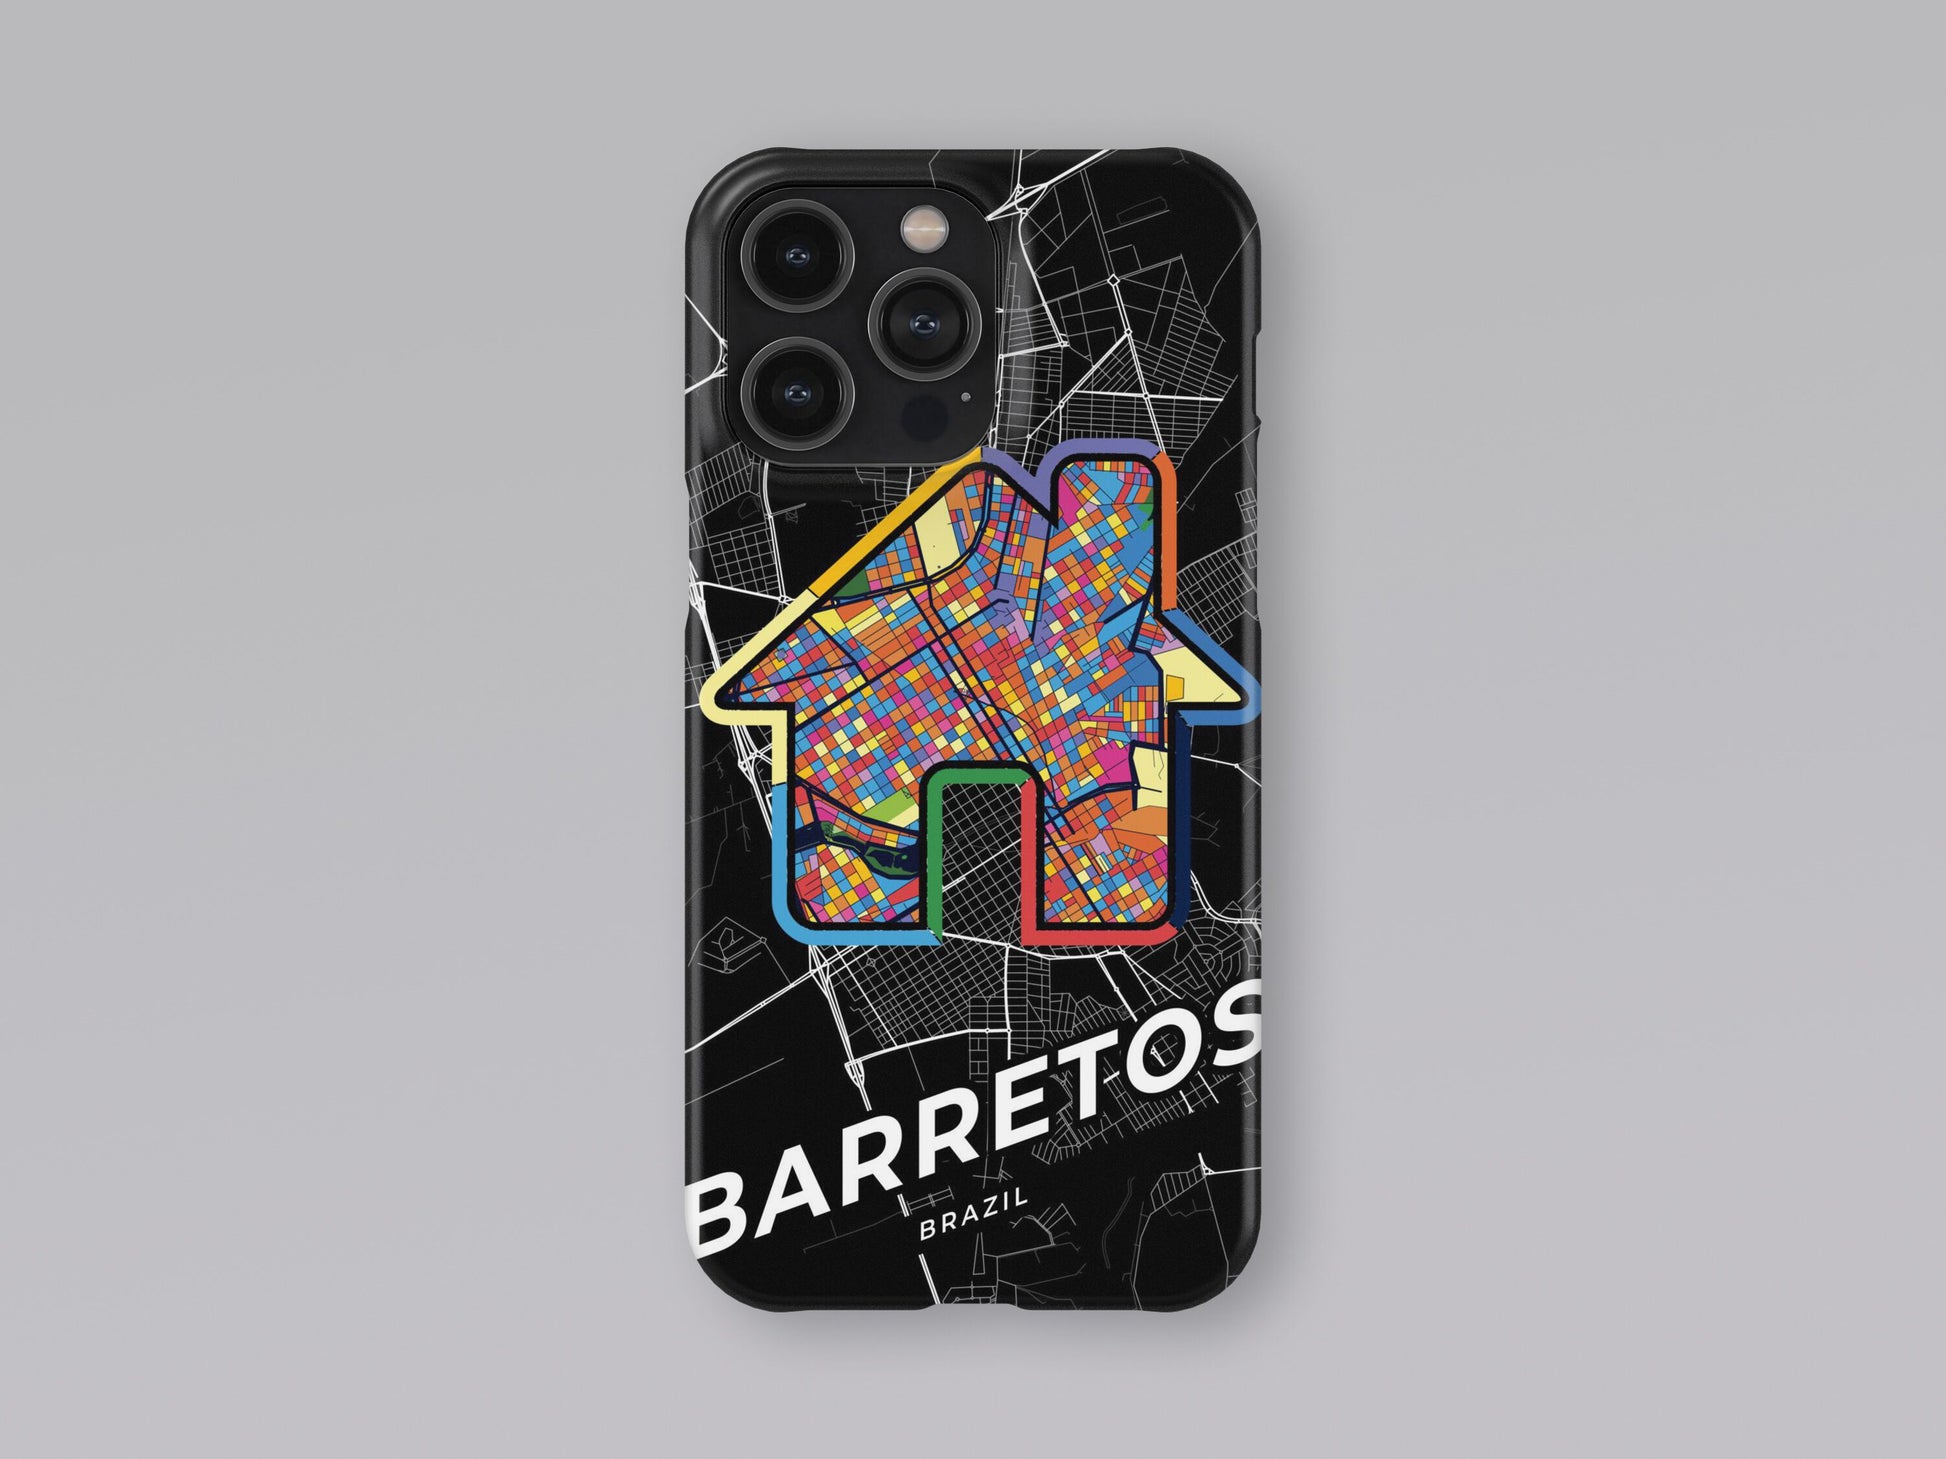 Barretos Brazil slim phone case with colorful icon. Birthday, wedding or housewarming gift. Couple match cases. 3